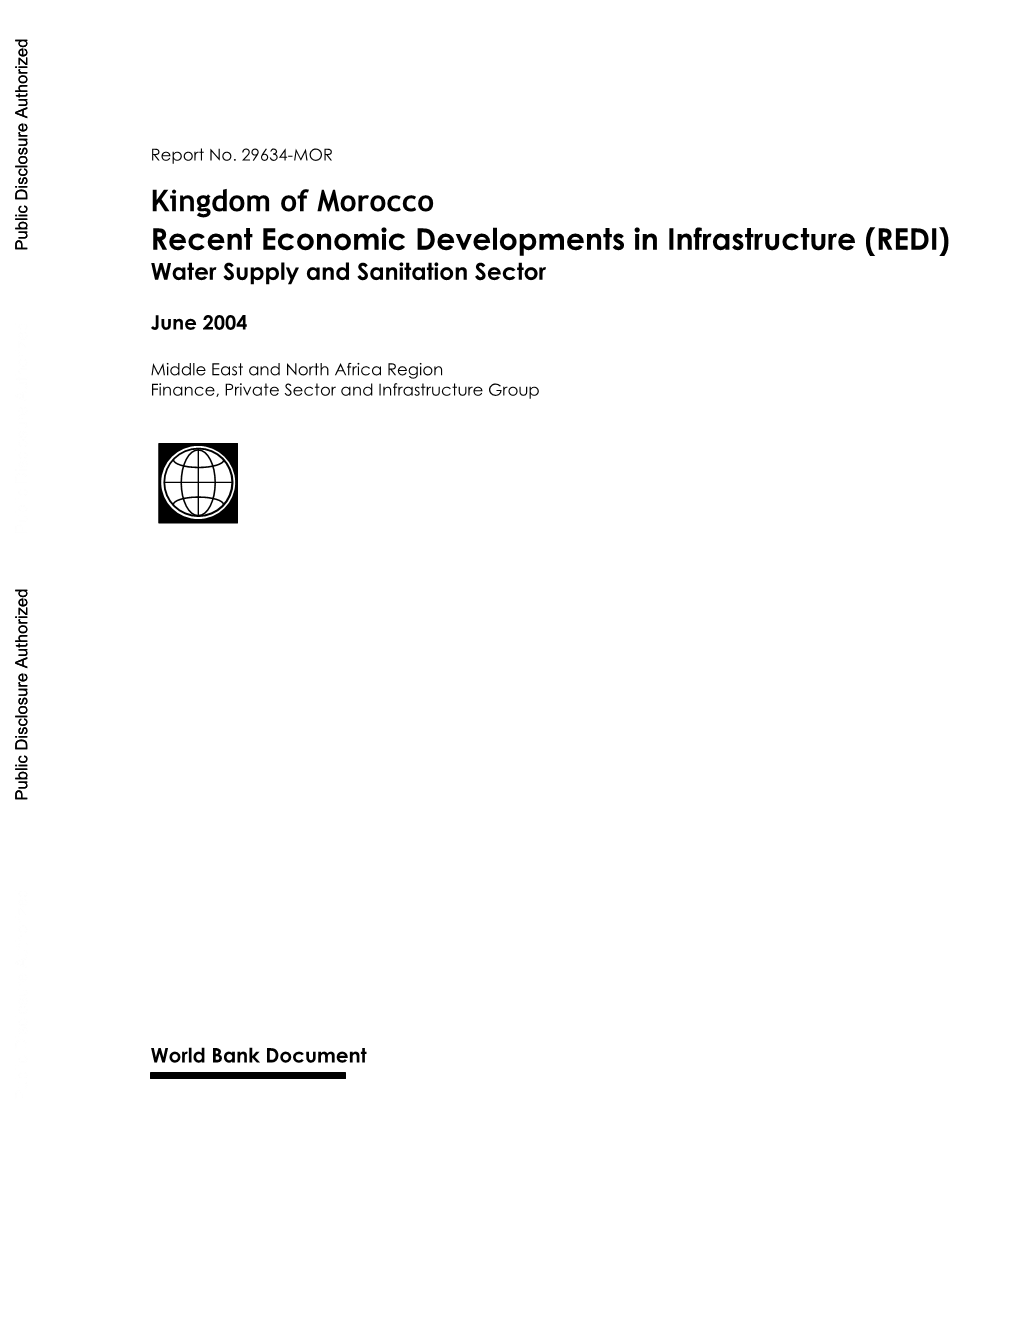 Kingdom of Morocco Recent Economic Developments in Infrastructure (REDI) Water Supply and Sanitation Sector